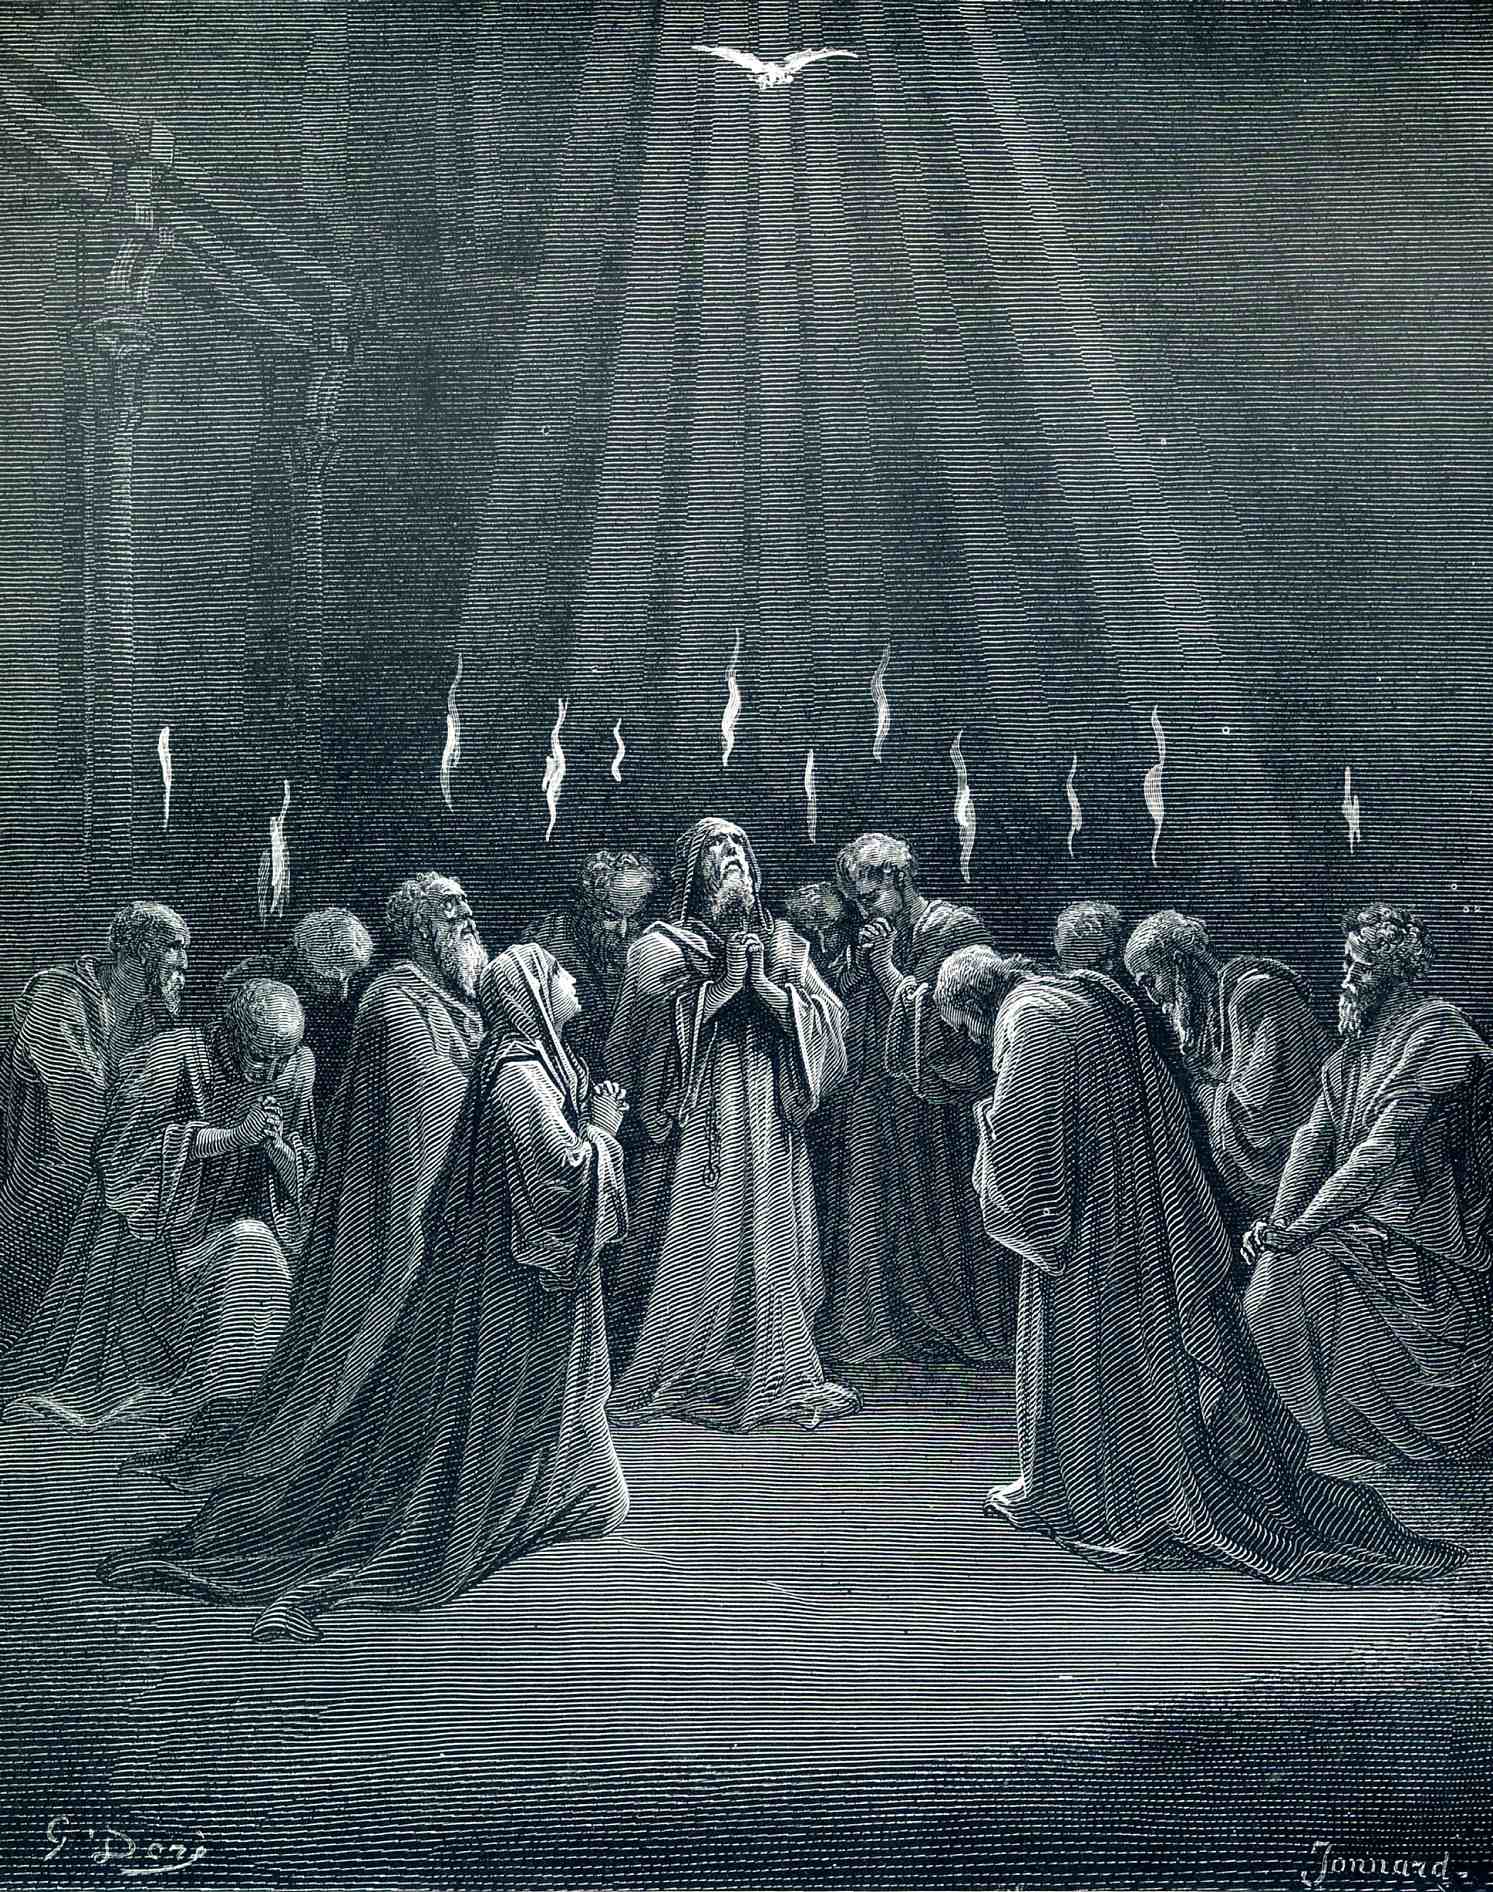 http://uploads8.wikiart.org/images/gustave-dore/the-descent-of-the-spirit.jpg